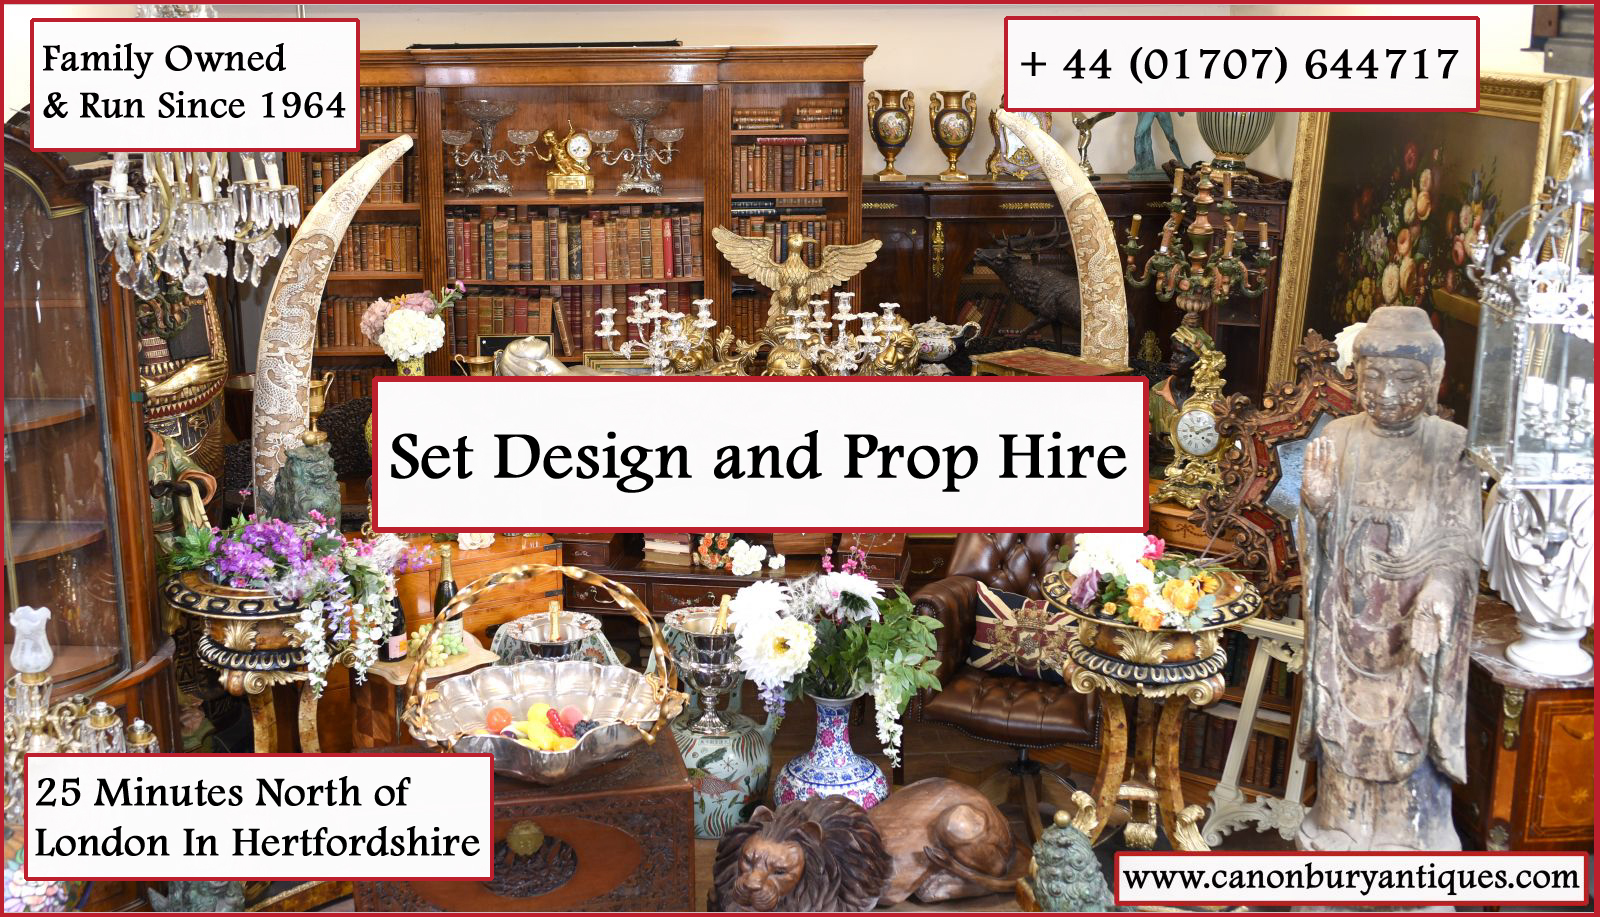 We have close ties with the film industry through out prop hire and set design services